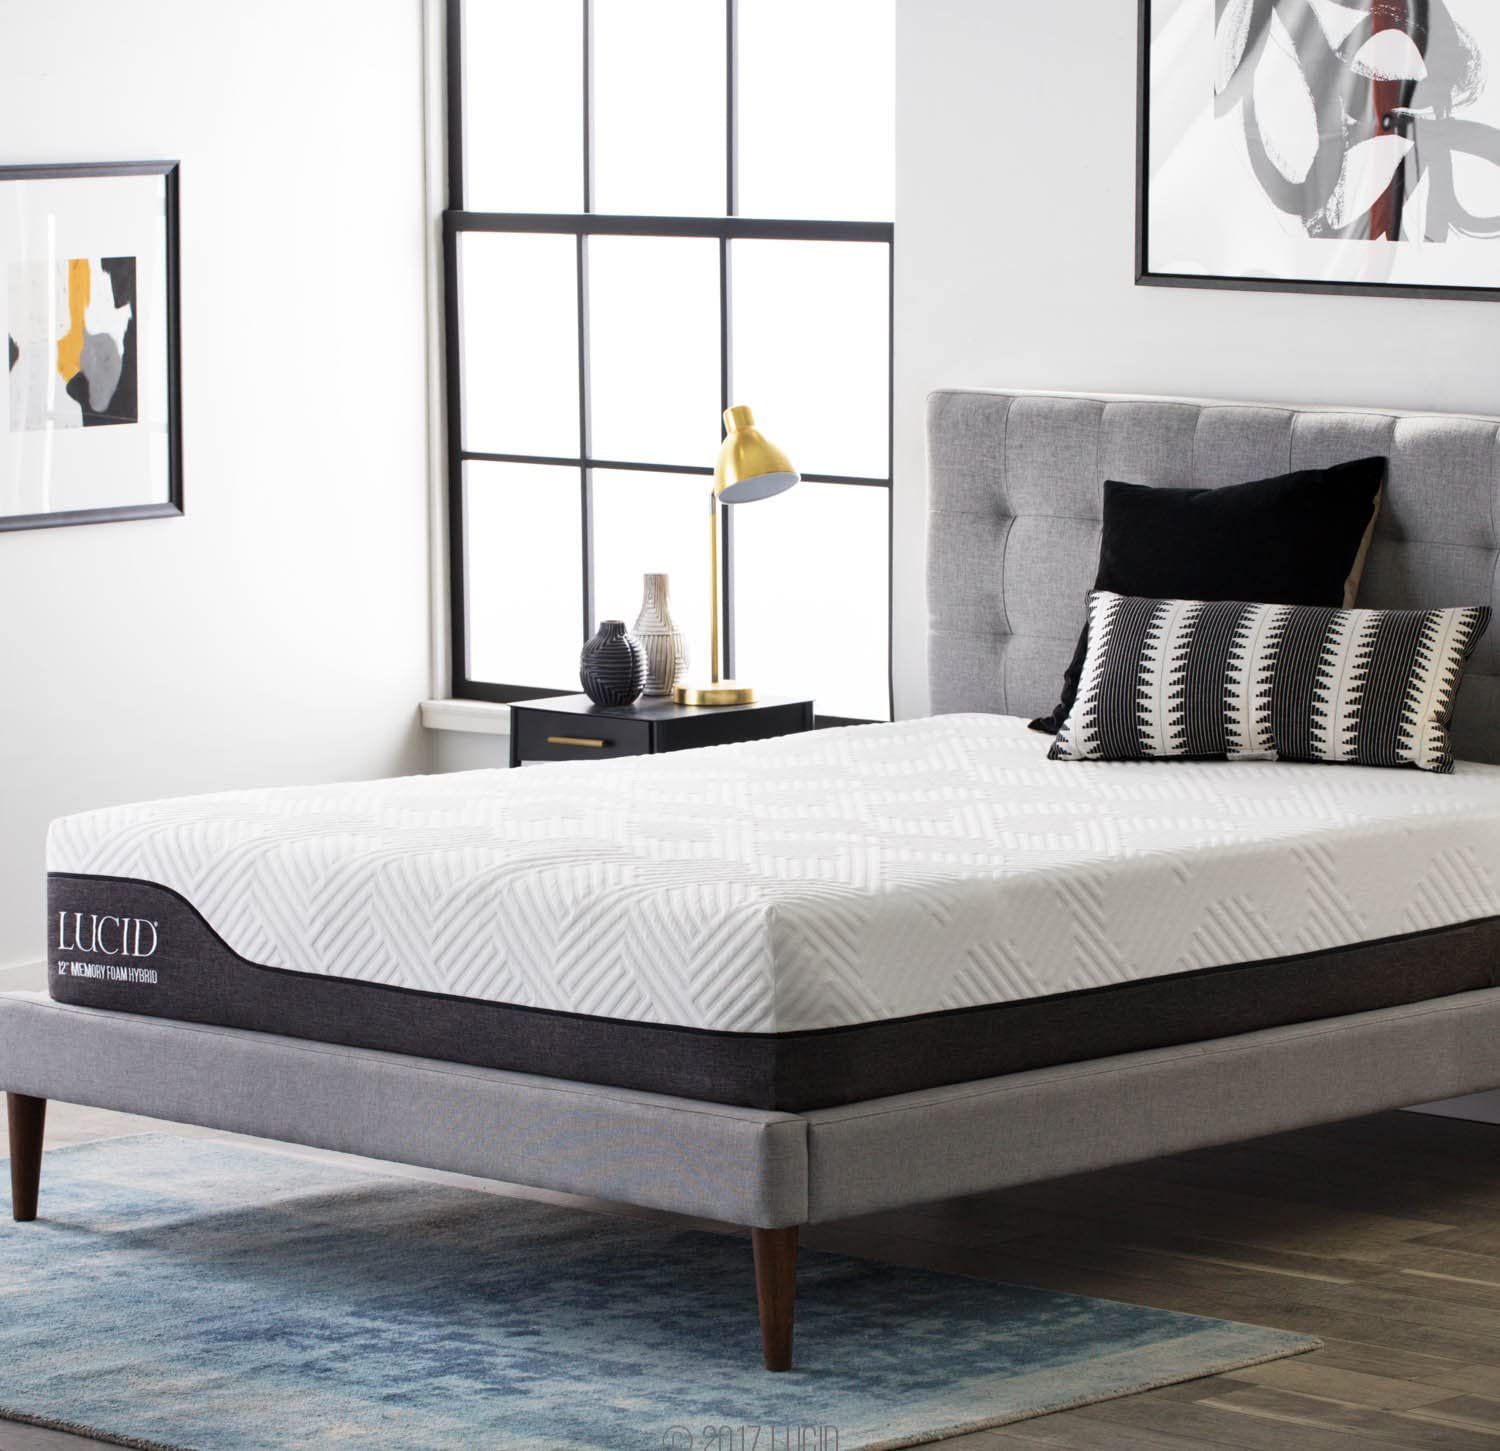 New in box LUCID 12 Inch Full size Hybrid Mattress Bamboo Charcoal and Aloe Vera Infused Memory Foam